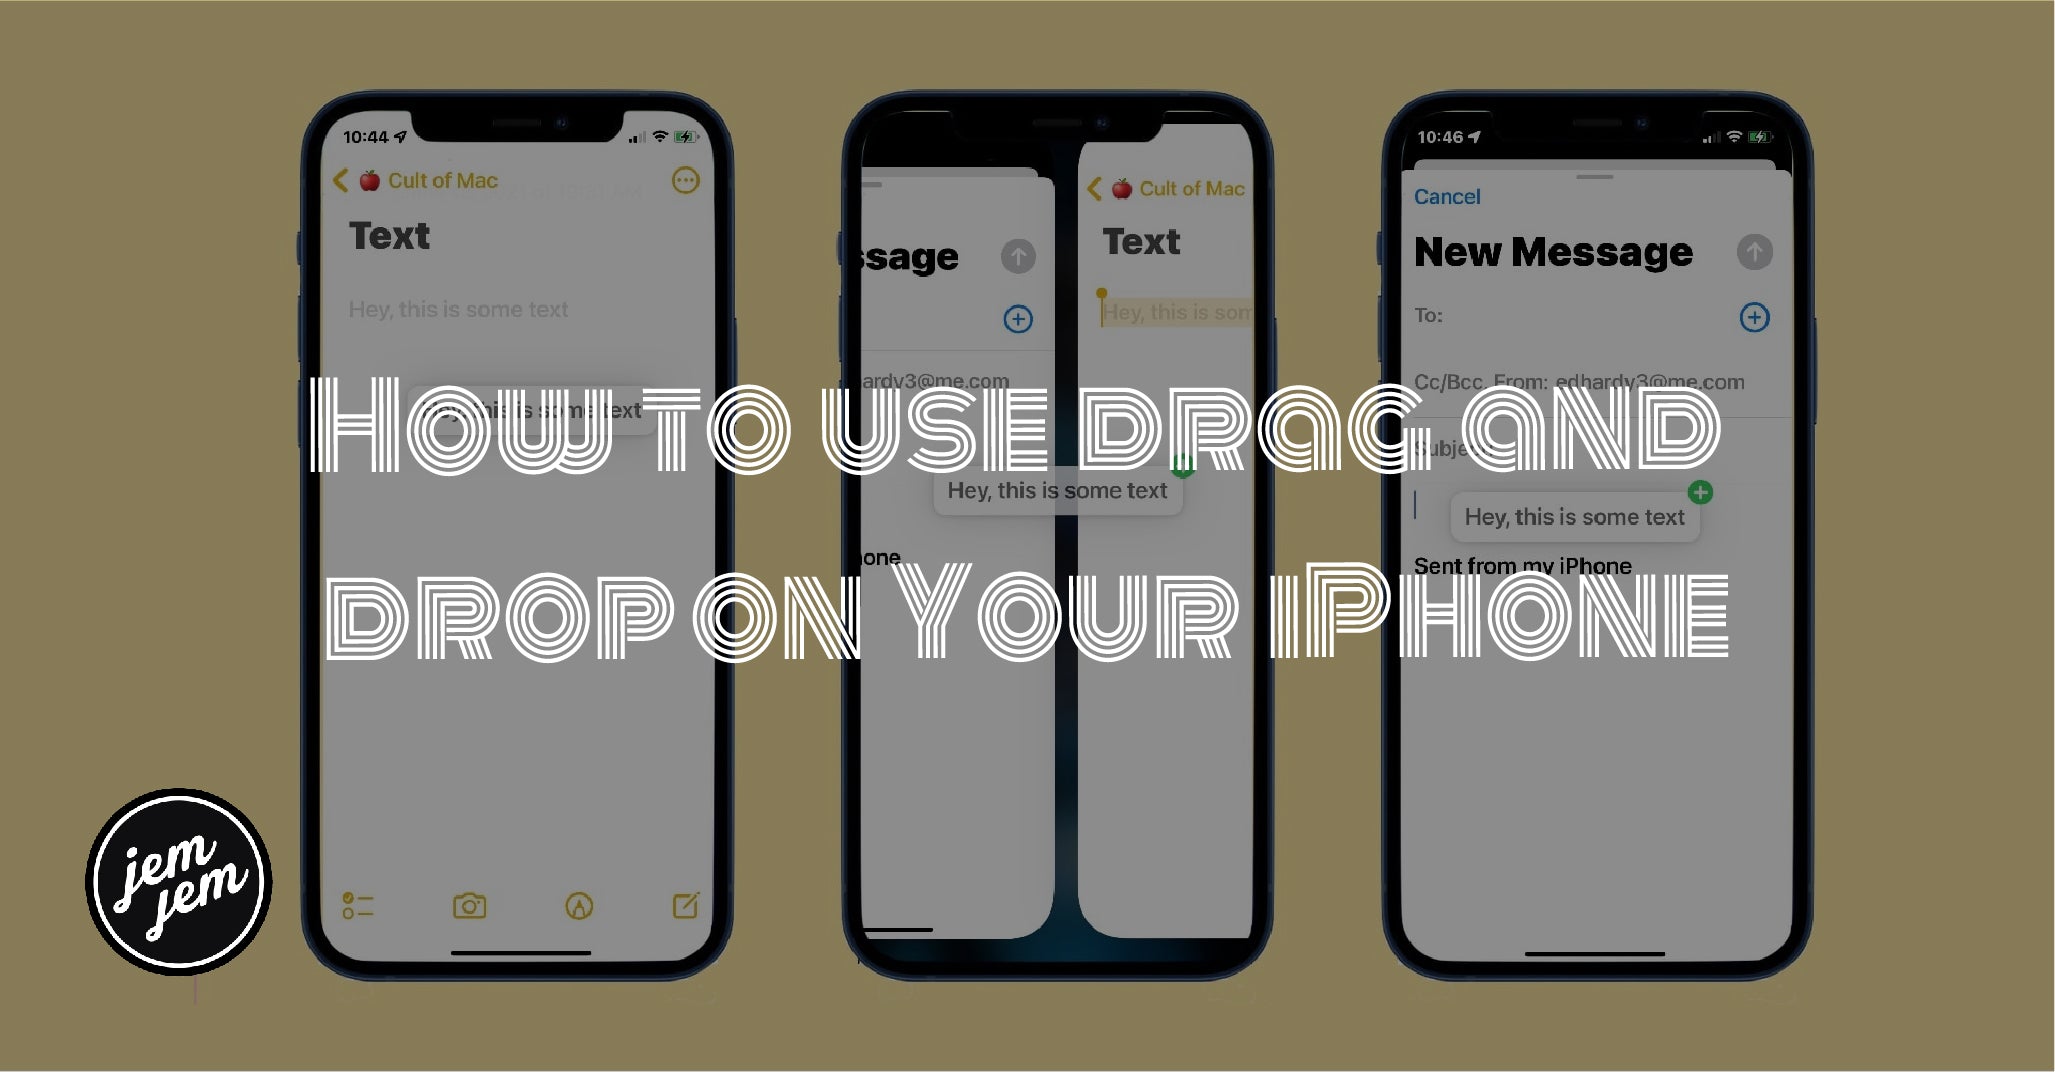 How to use drag and drop on Your iPhone